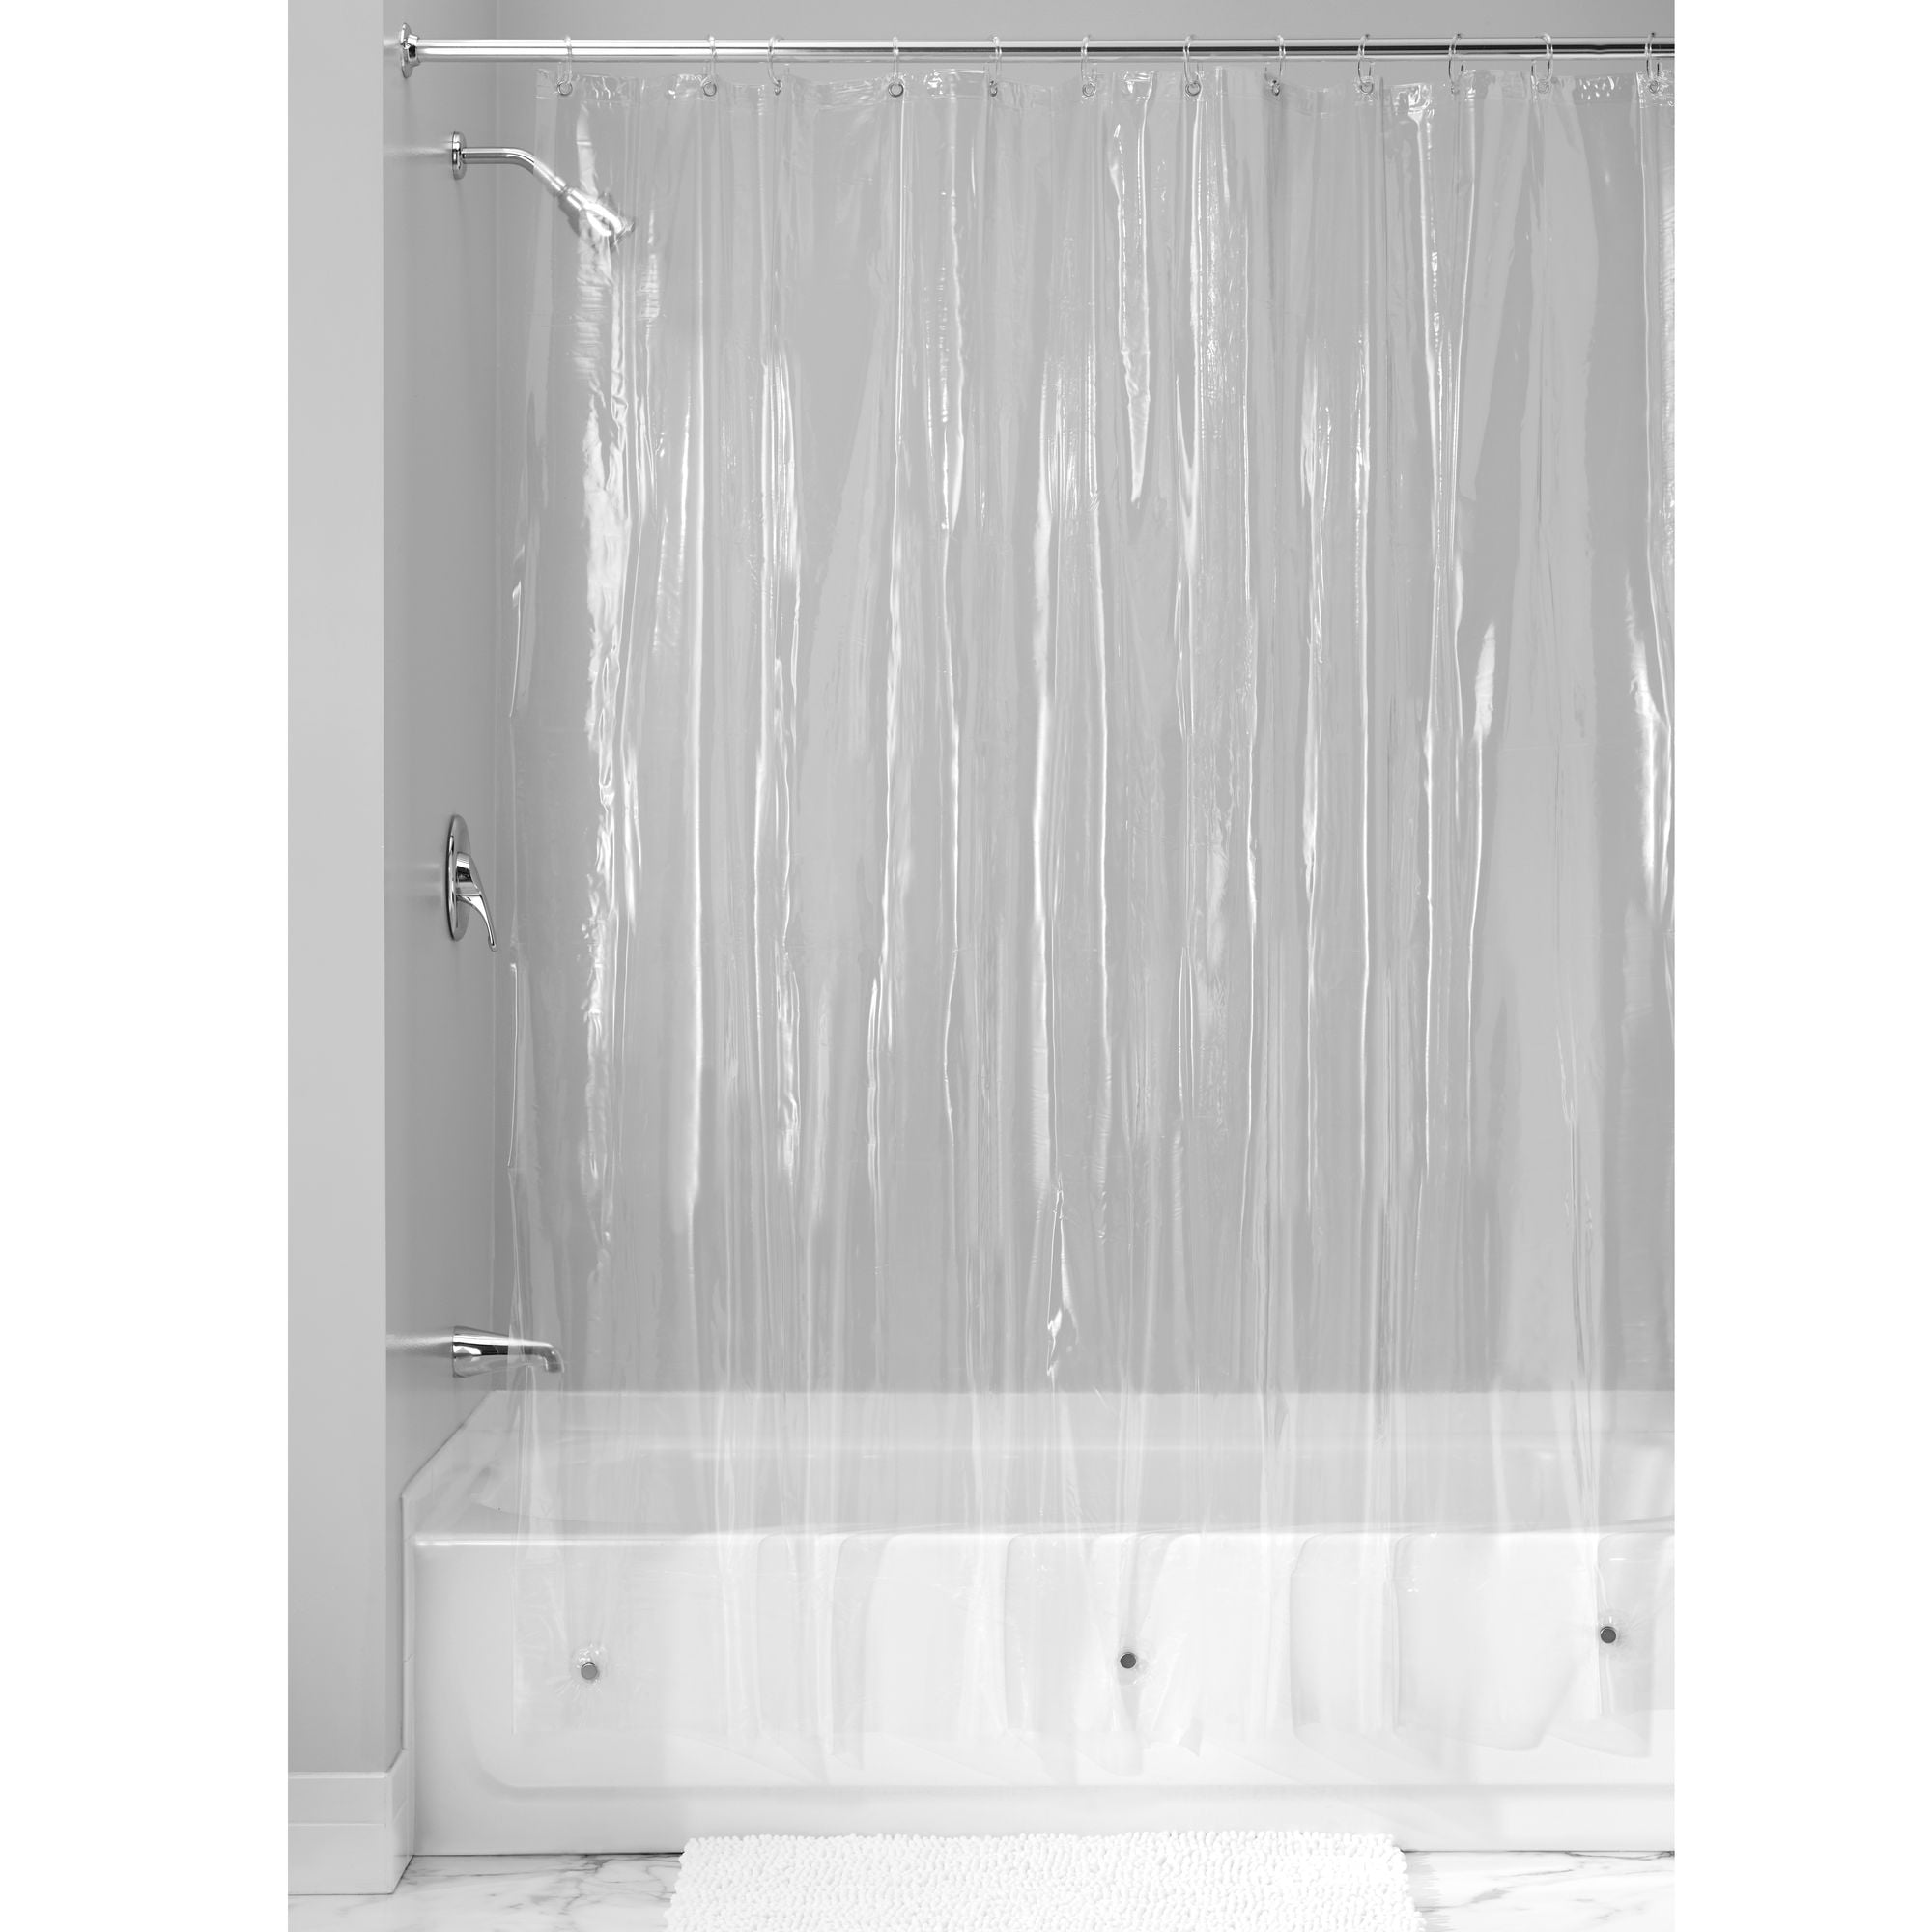 54" x 78" Clear Mildew Resistant Heavyweight PEVA Shower Stall Curtain Liner 